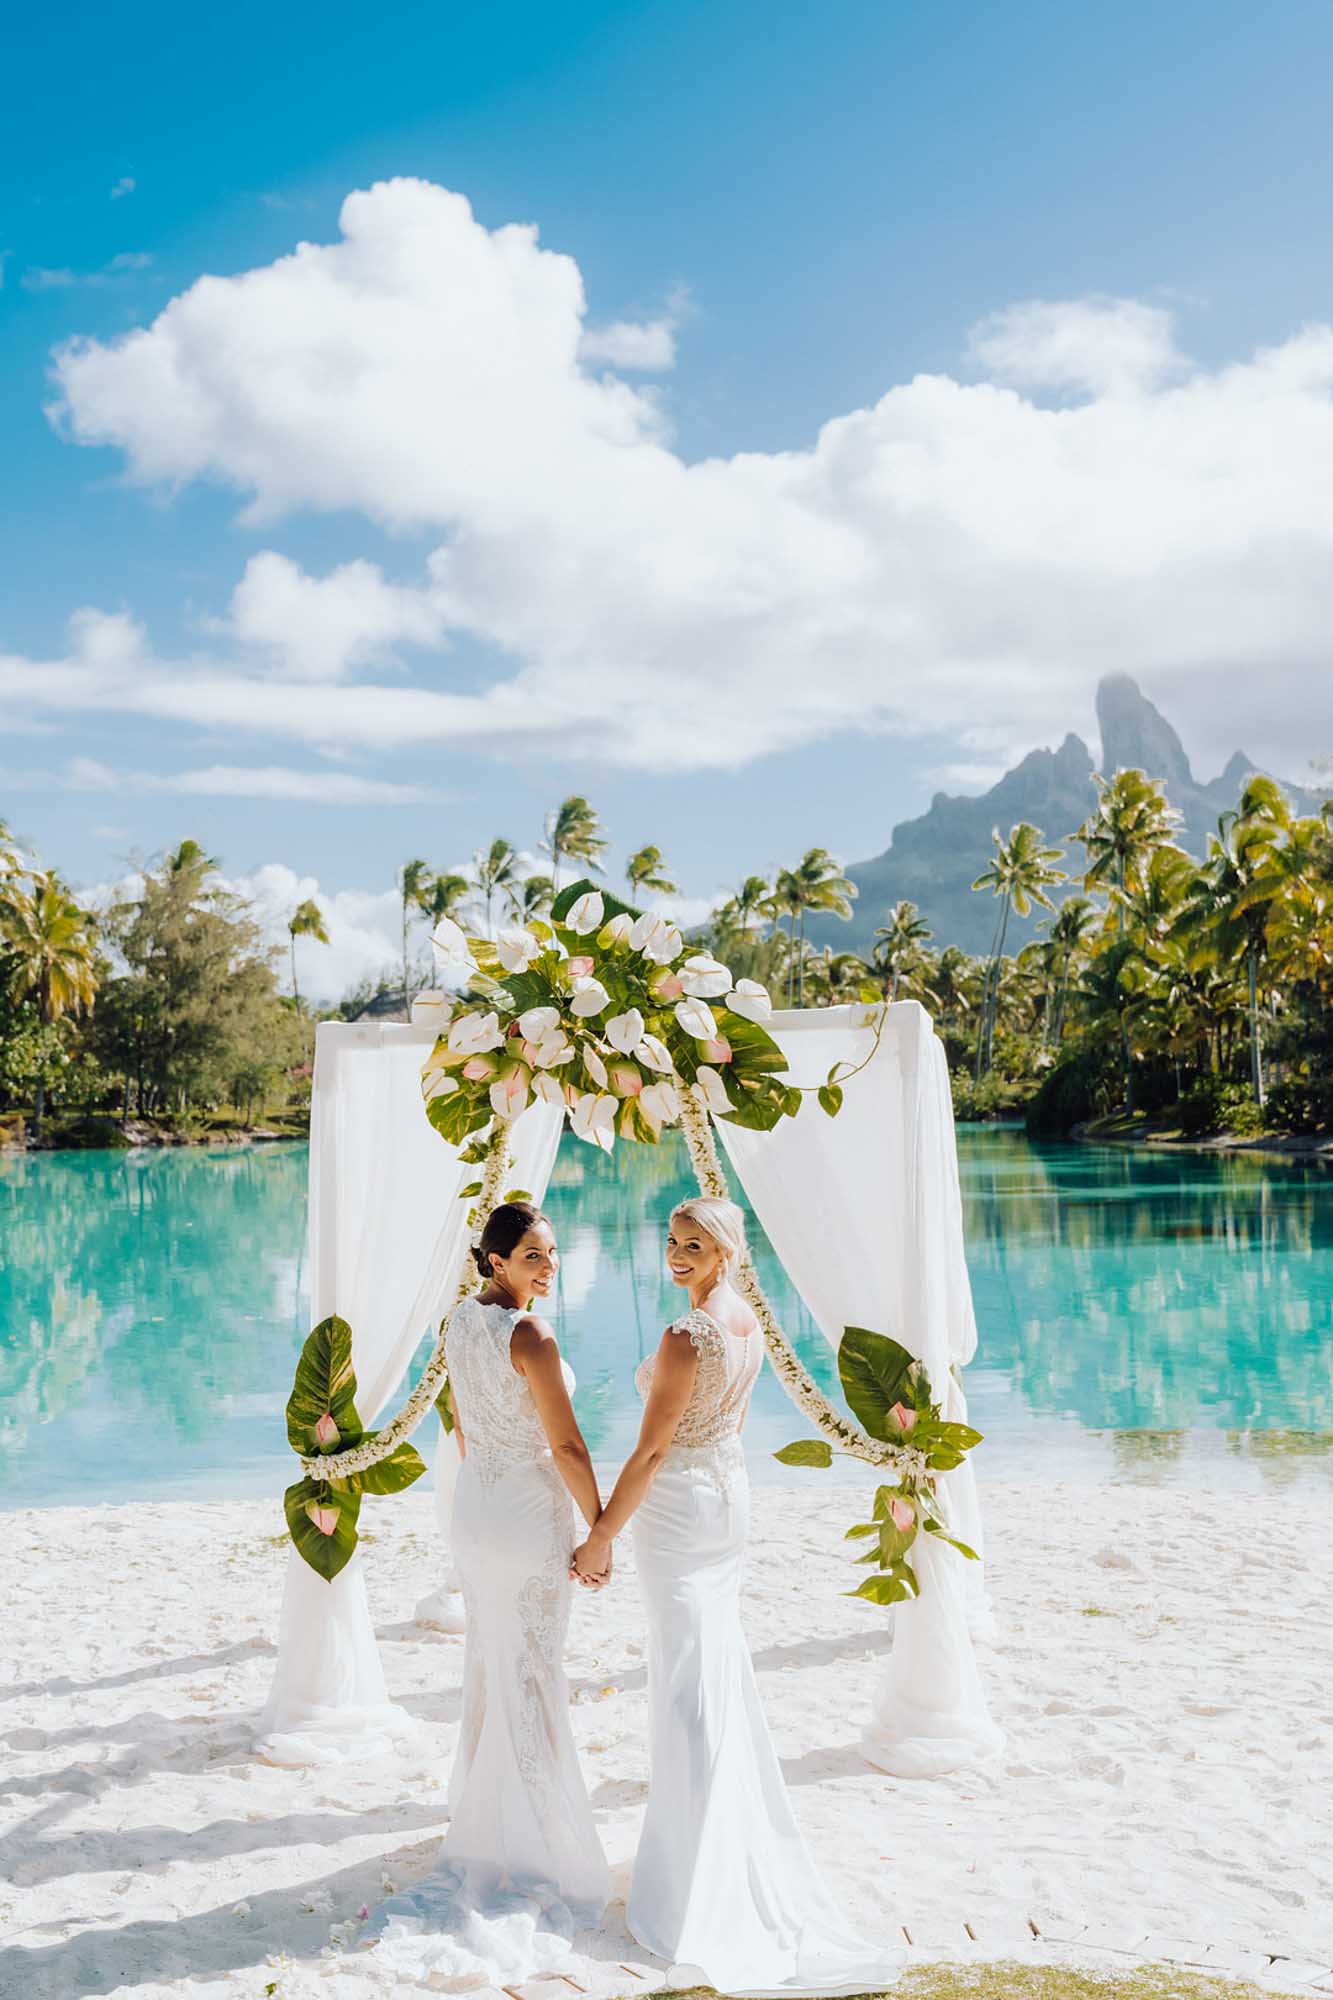 Stunning outdoor elopement on the island of Bora Bora | Marc Gérard Photography | Featured on Equally Wed, the leading LGBTQ+ wedding magazine